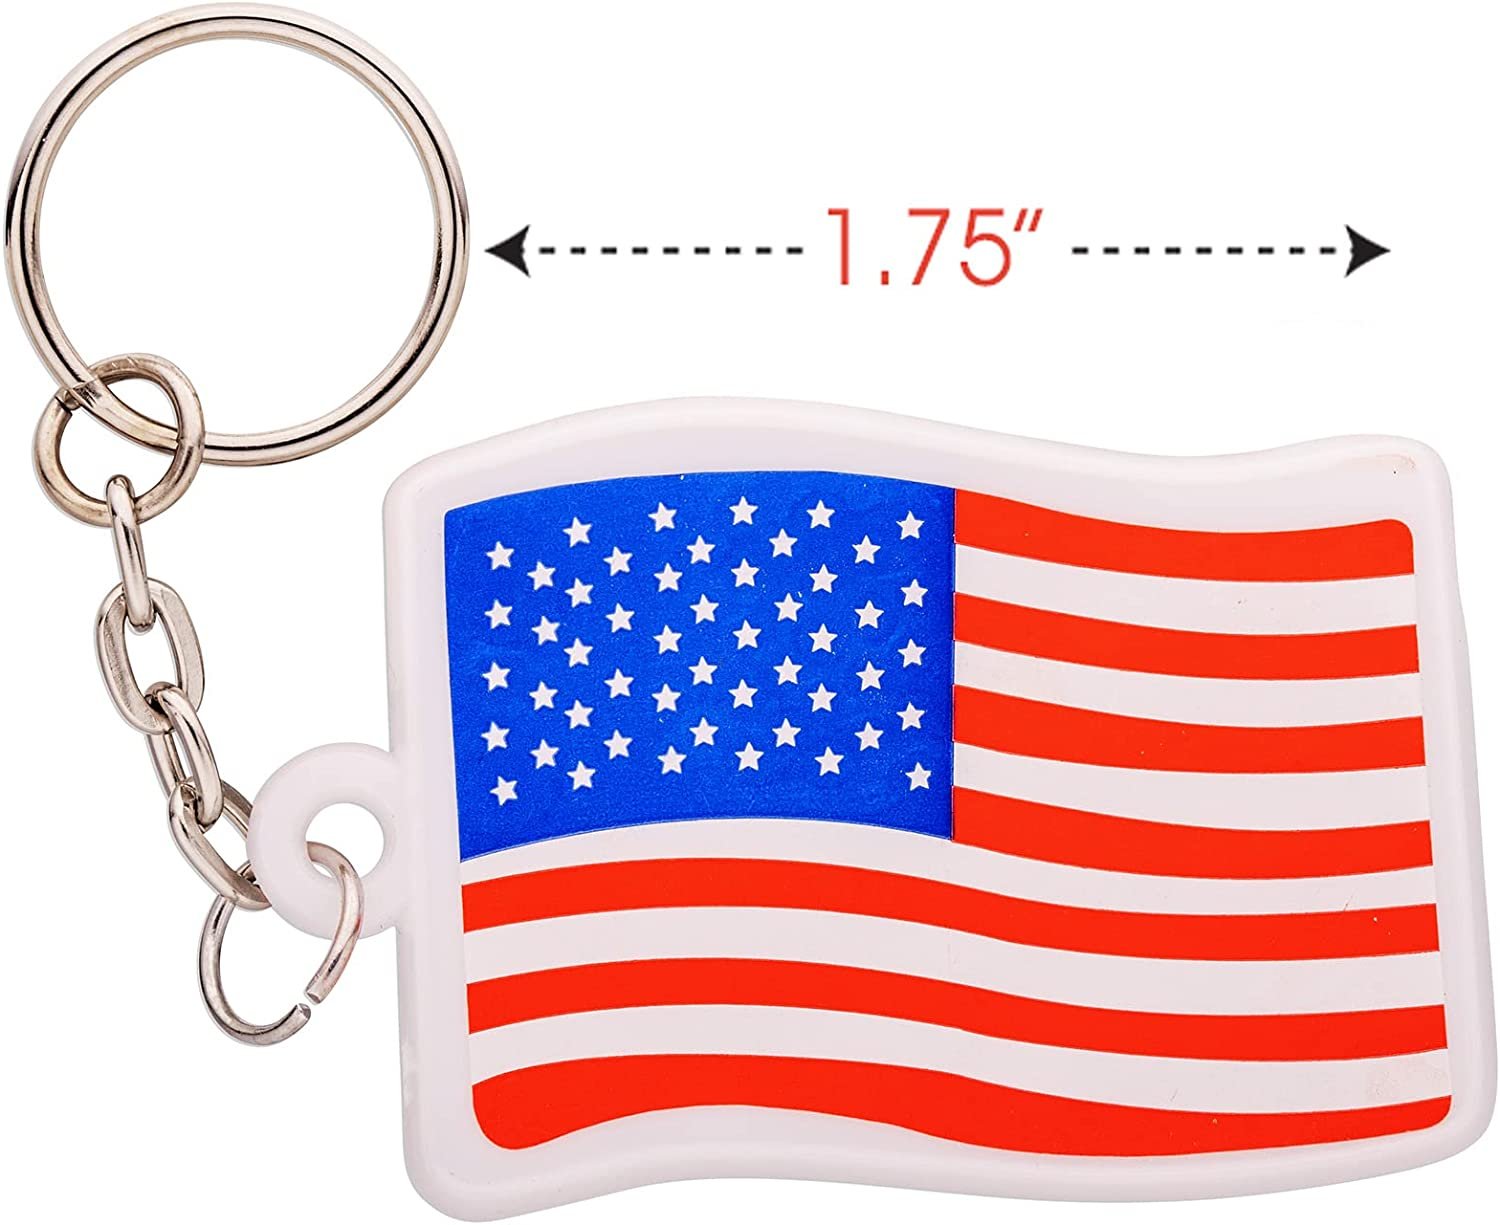 Set of 24 American Flag Keychains, 4th of July Party Favors, USA Flag Key Chains for Independence, Memorial, and Veterans Day, United States Patriotic Accessories for Kids